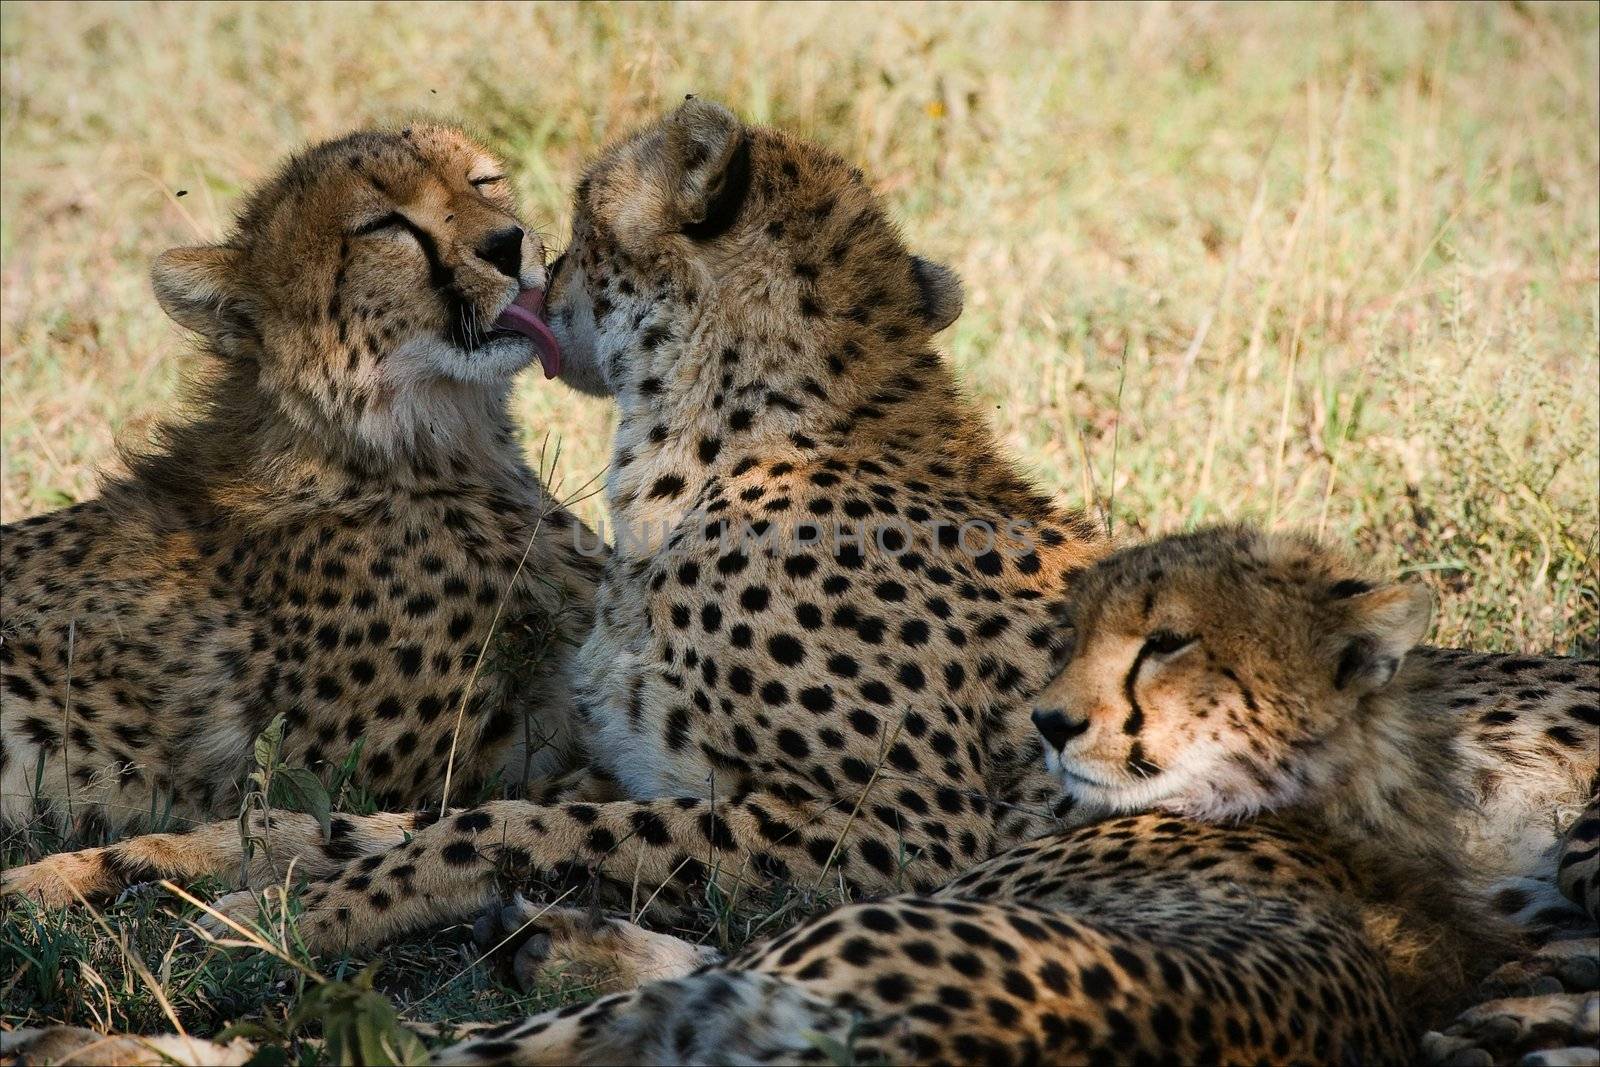 The third superfluous. One cheetah licks another, the third sadly lies near.